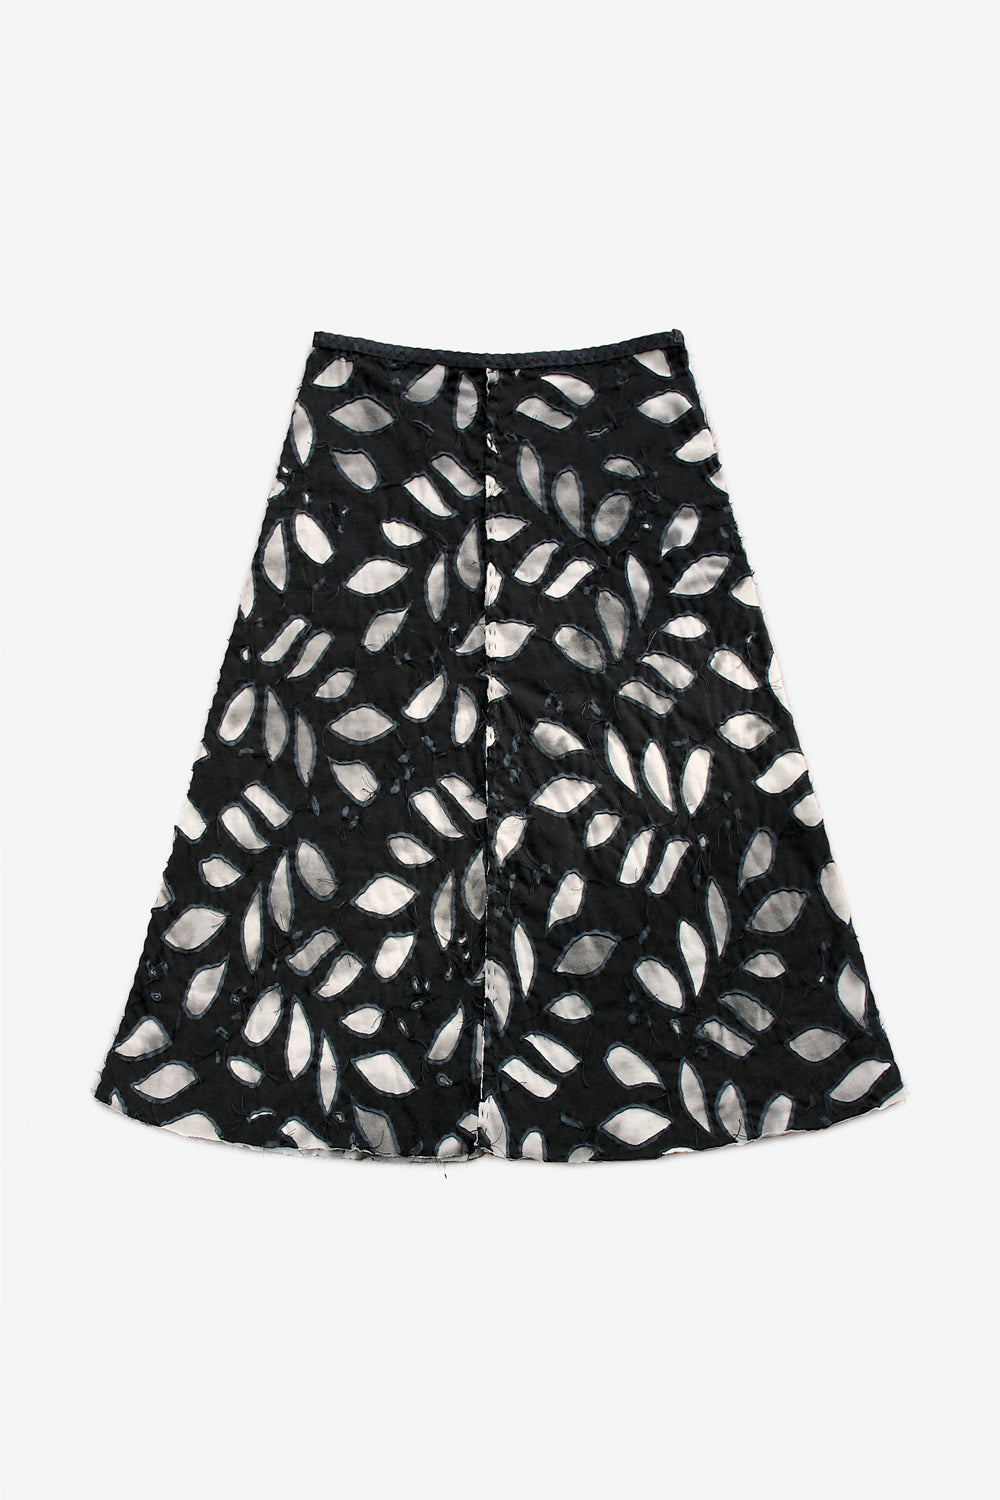 The School of Making Faded Bloomers Swing Skirt in Black